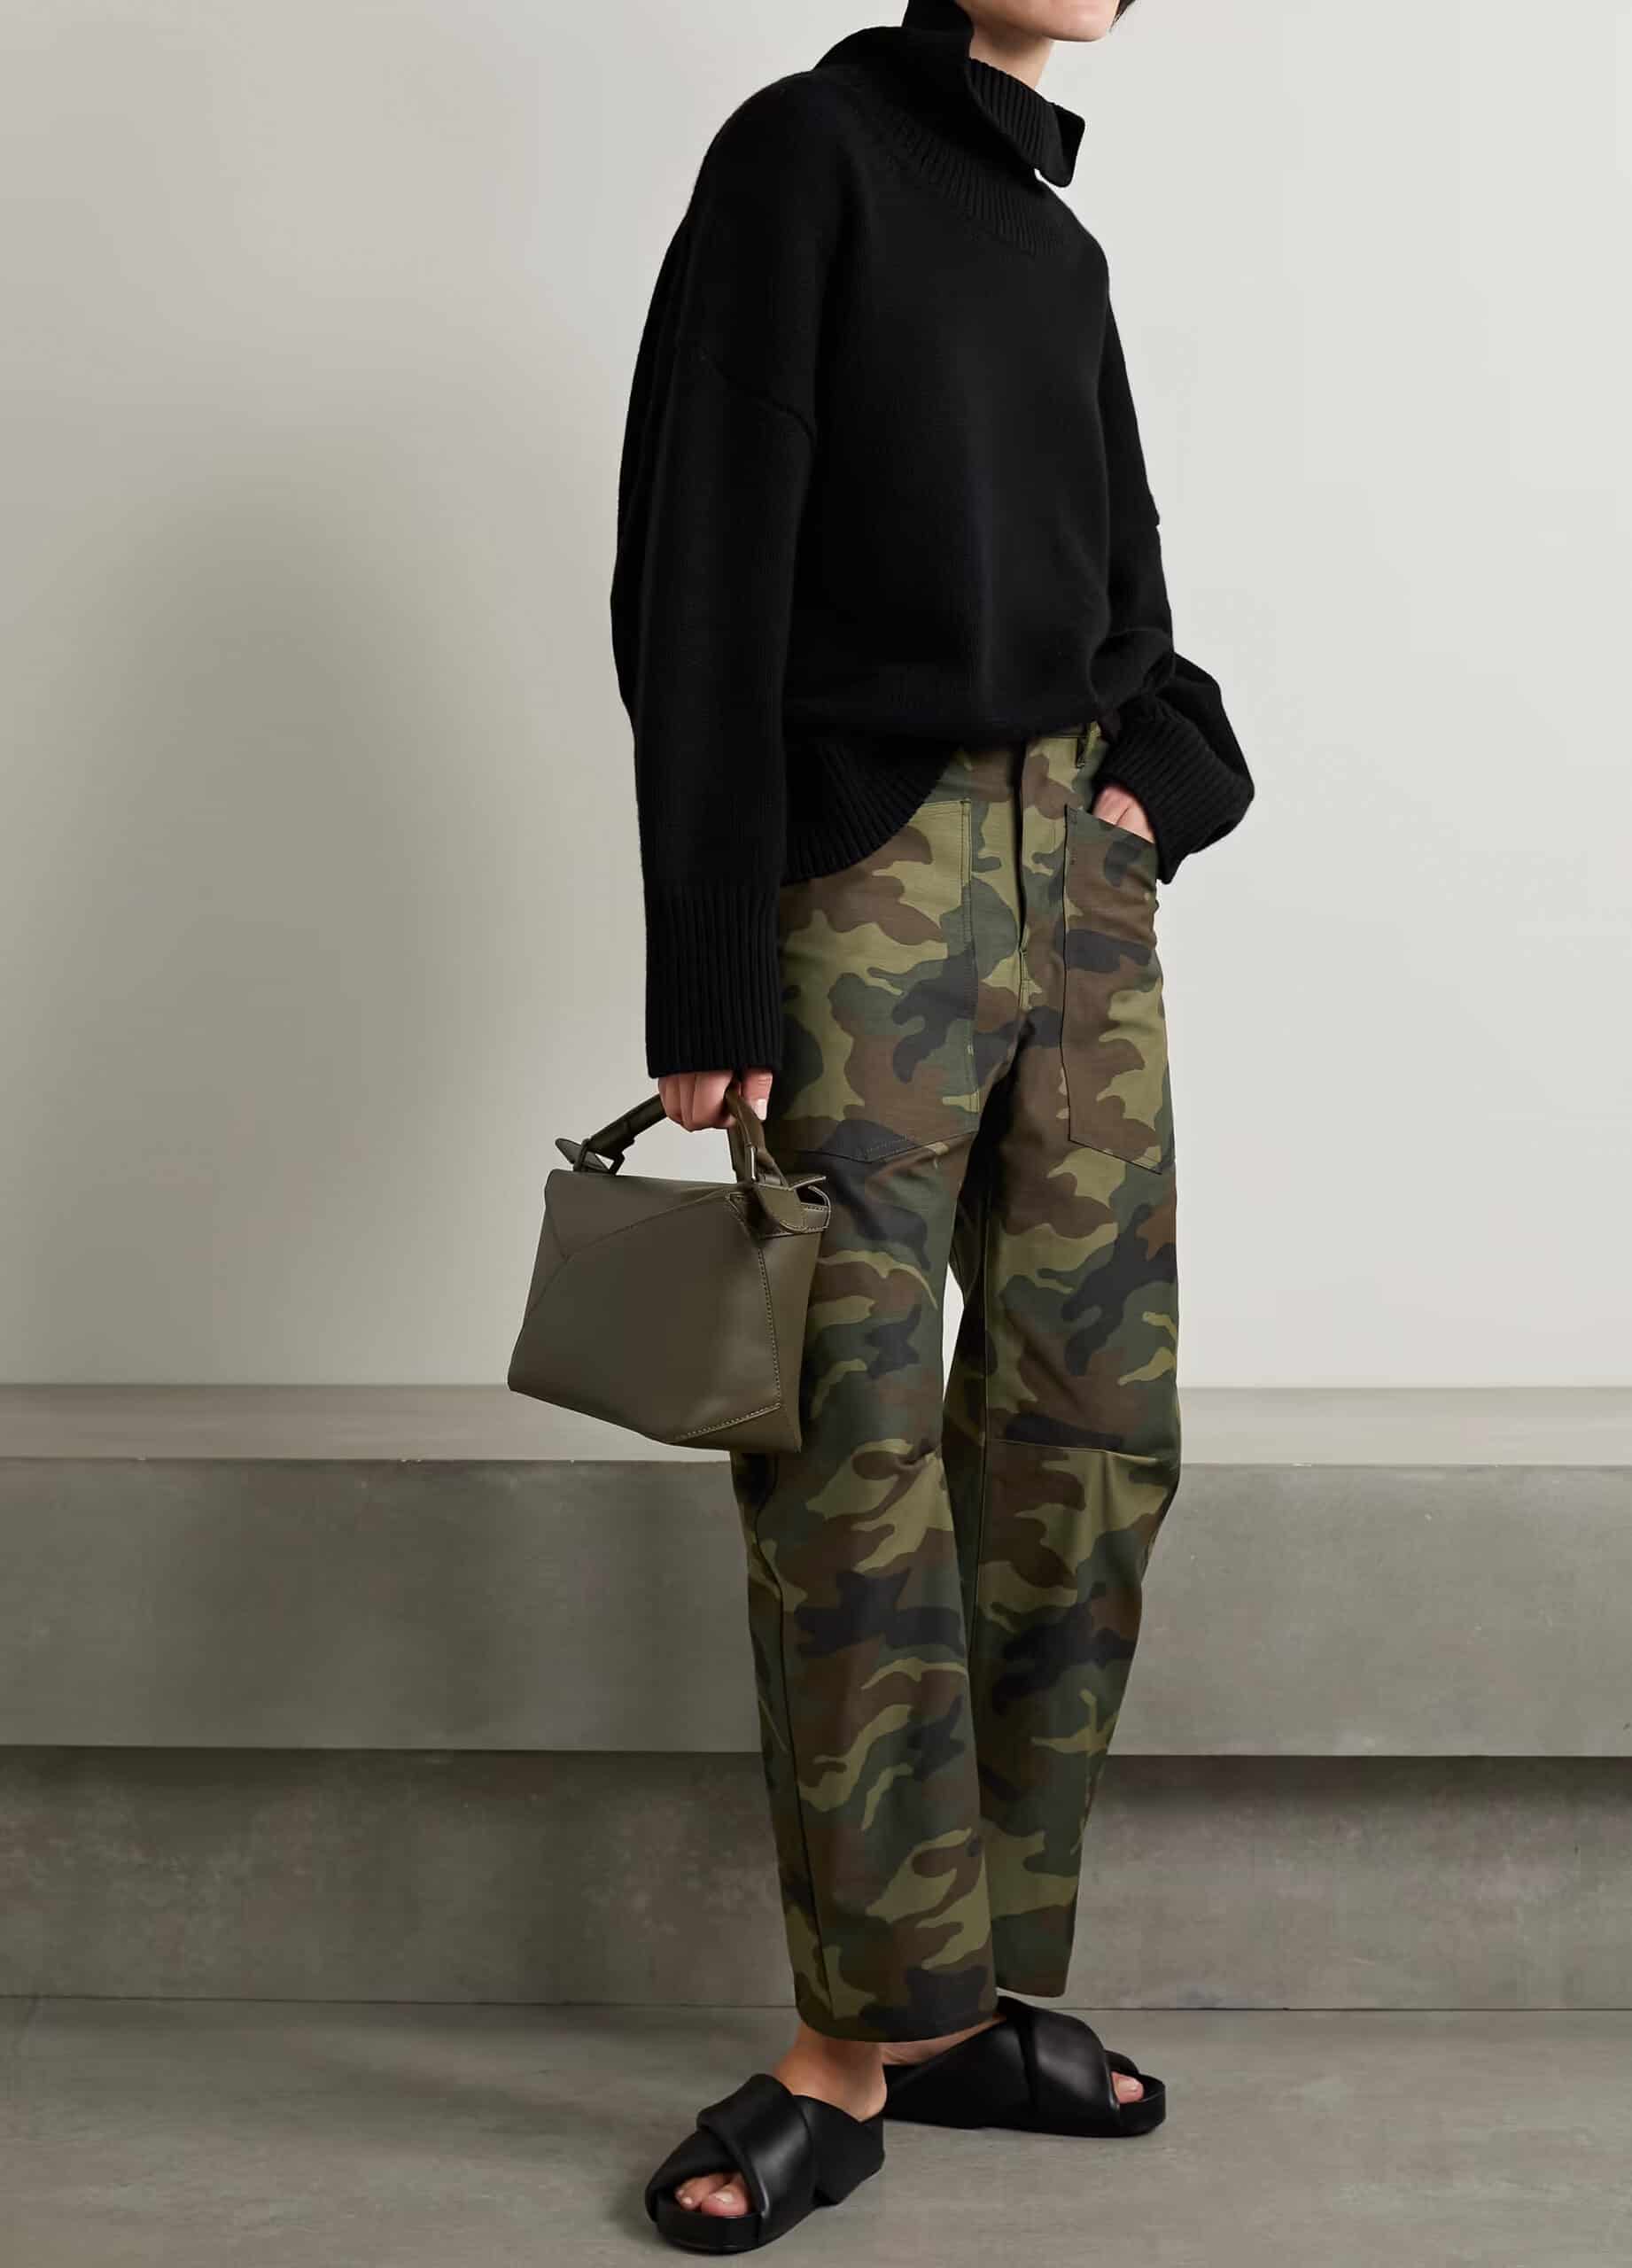 A woman wearing camo pants with a black turtleneck sweater and black slide sandals